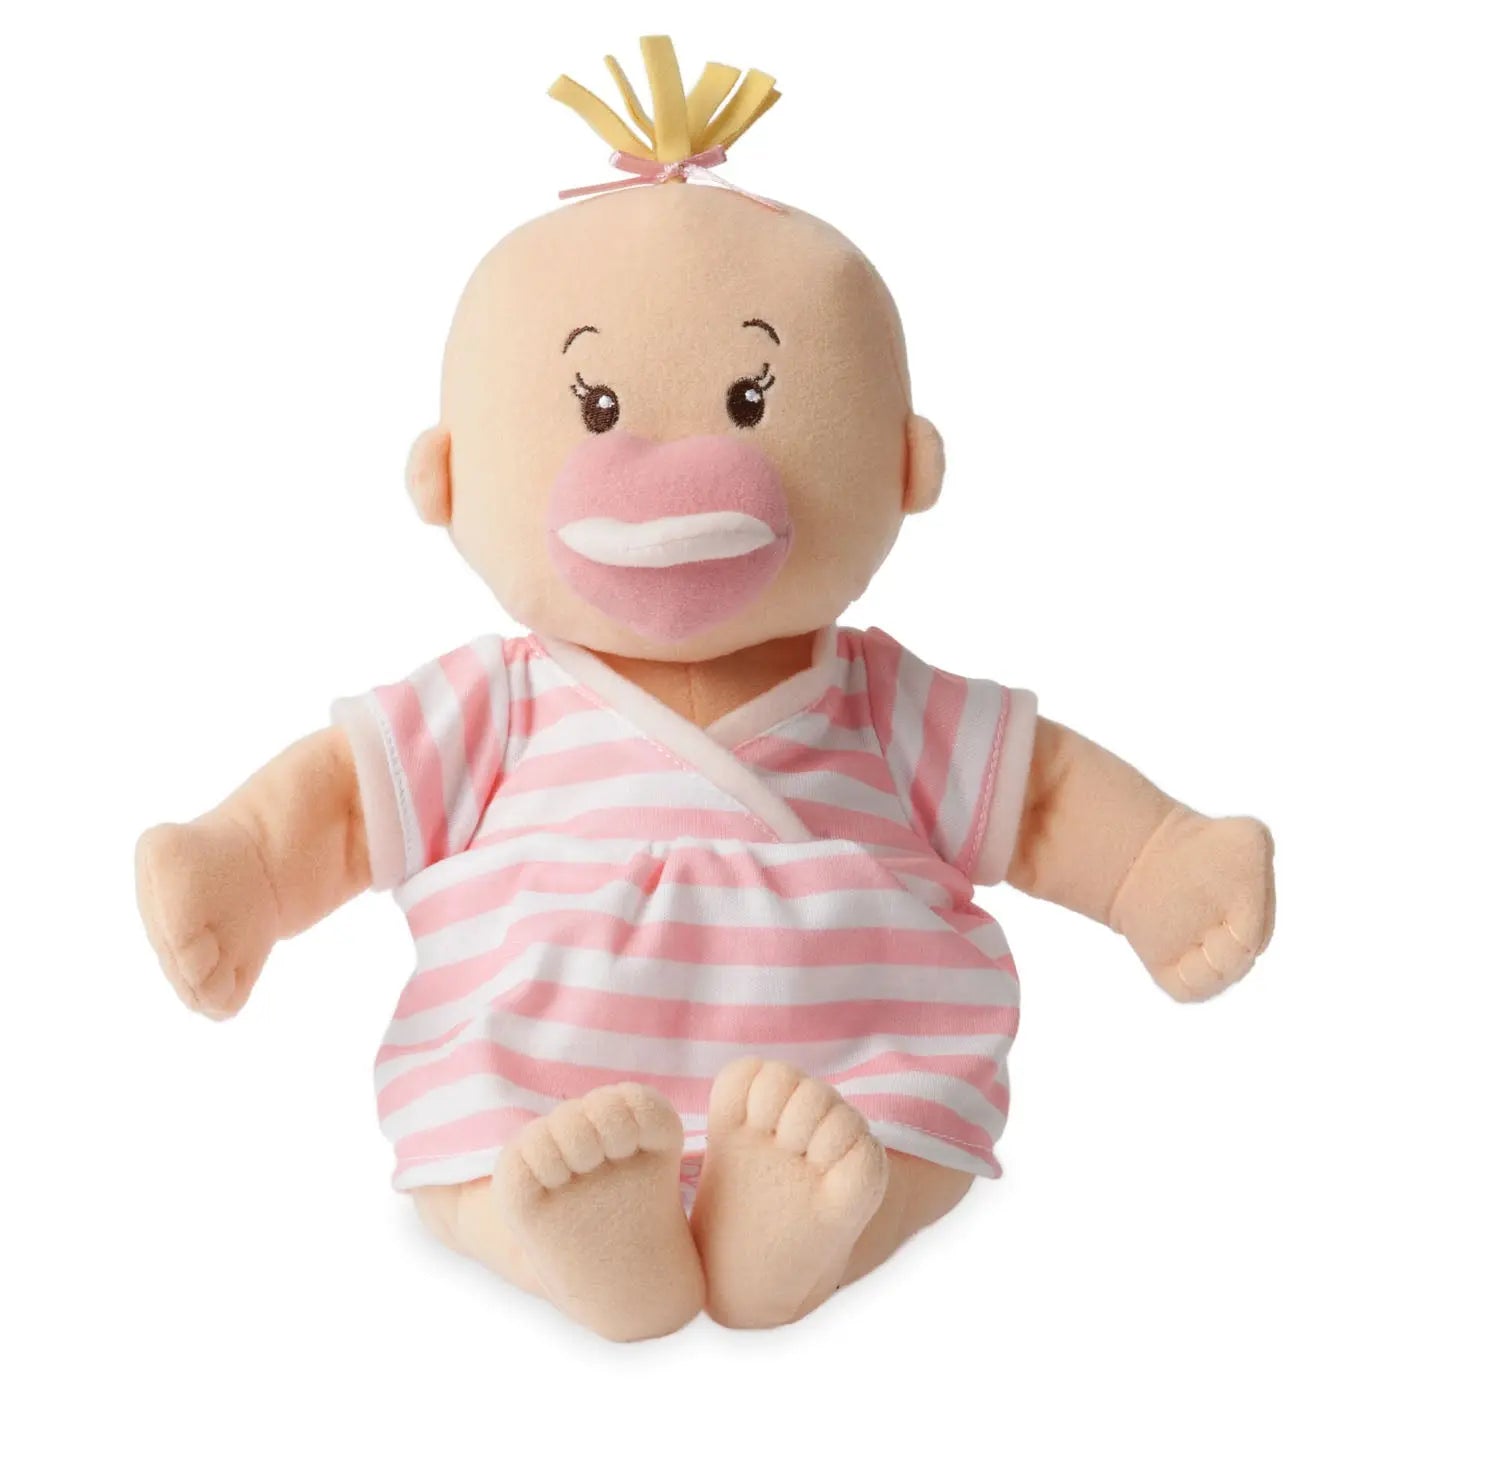 Baby Toys For 12-24 Months - Manhattan Toy Company